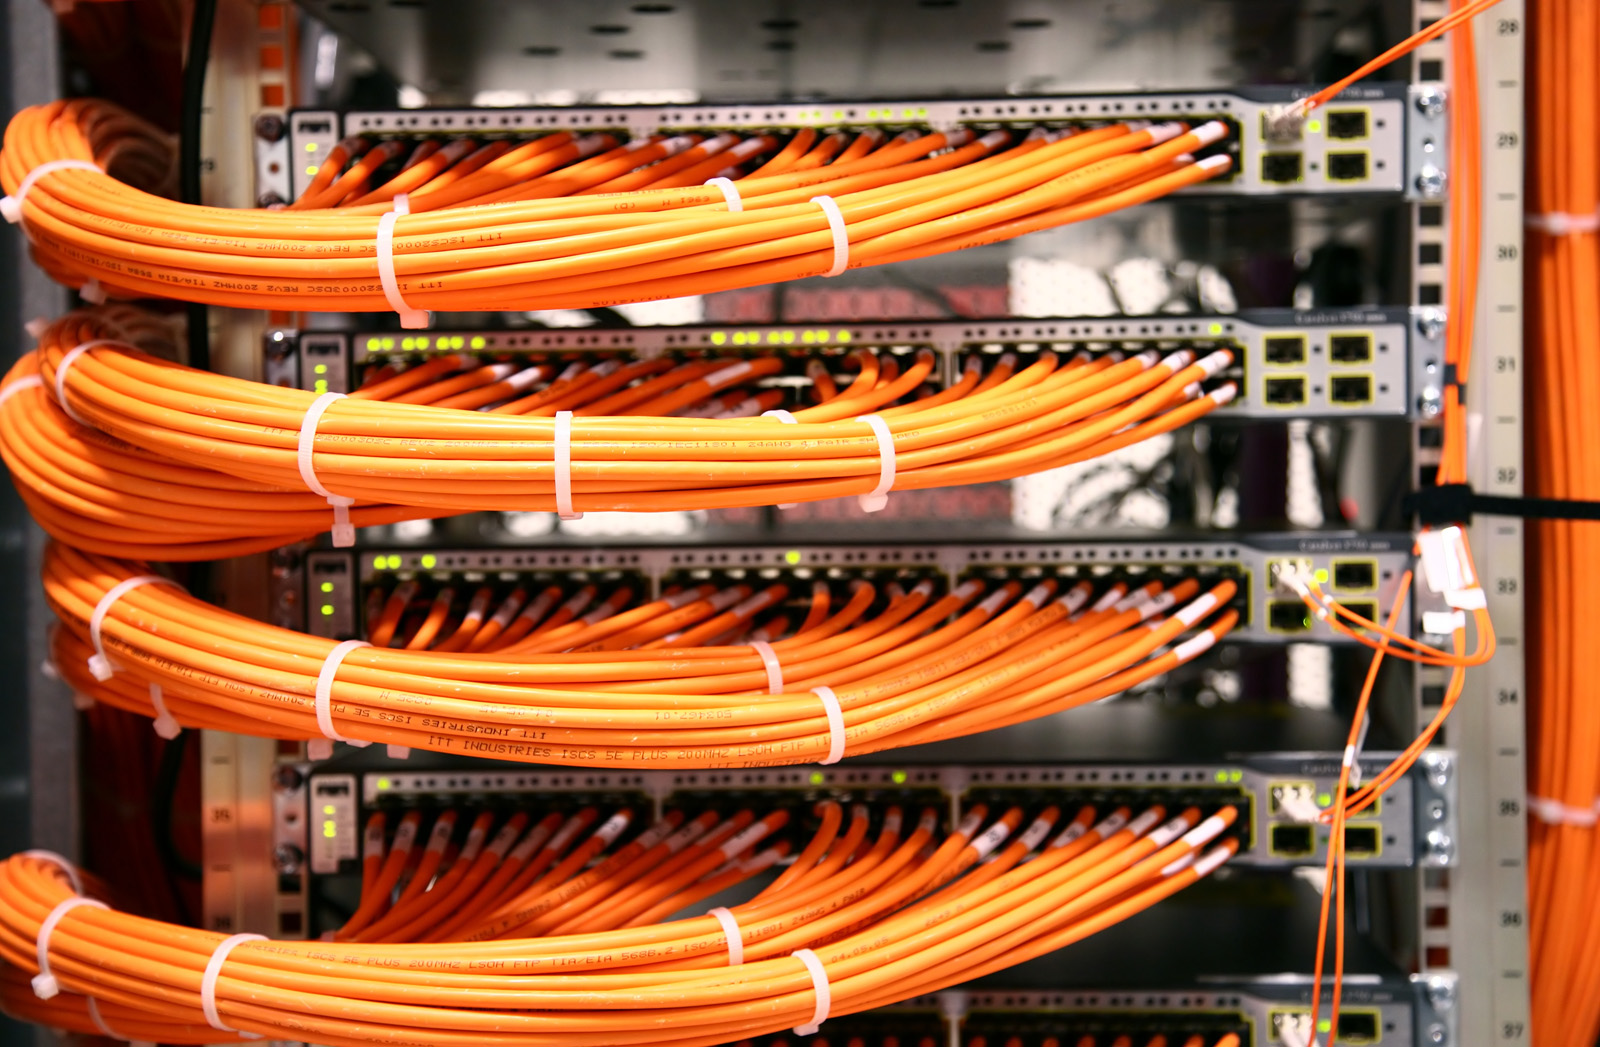 Morganfield Kentucky Preferred Voice & Data Network Cabling Provider